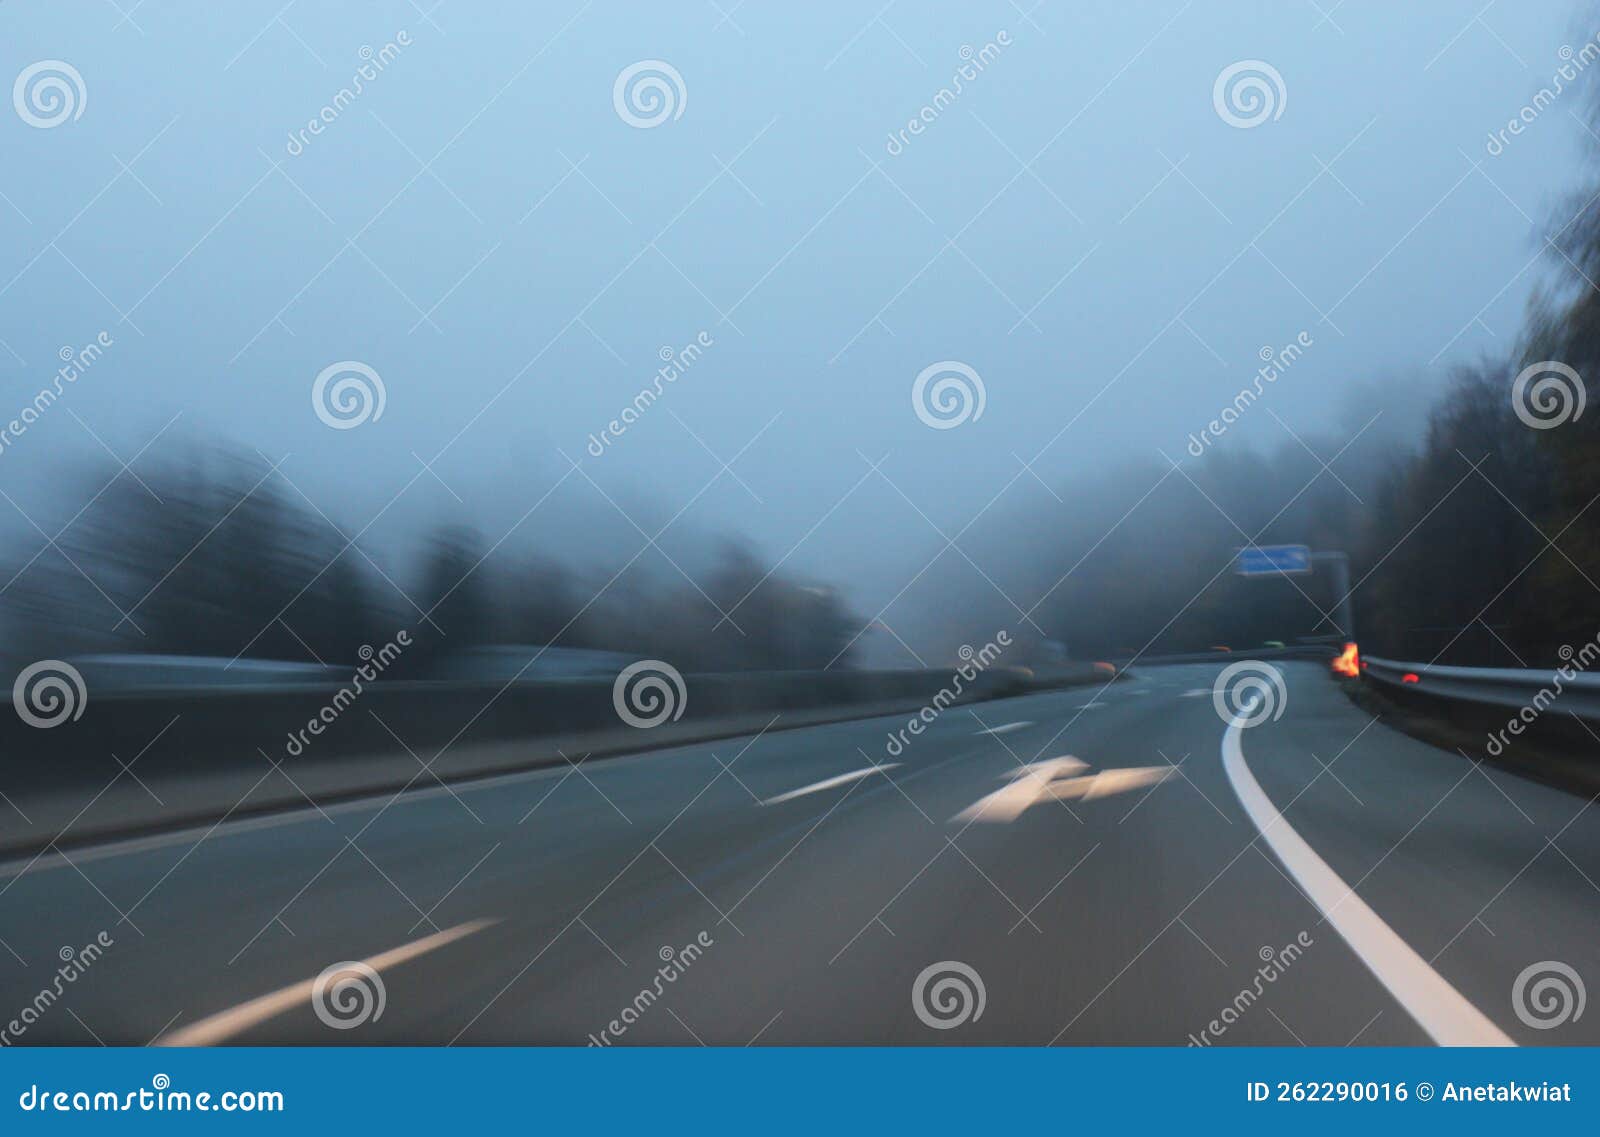 higway with fog and poor visibility. motin blur effect